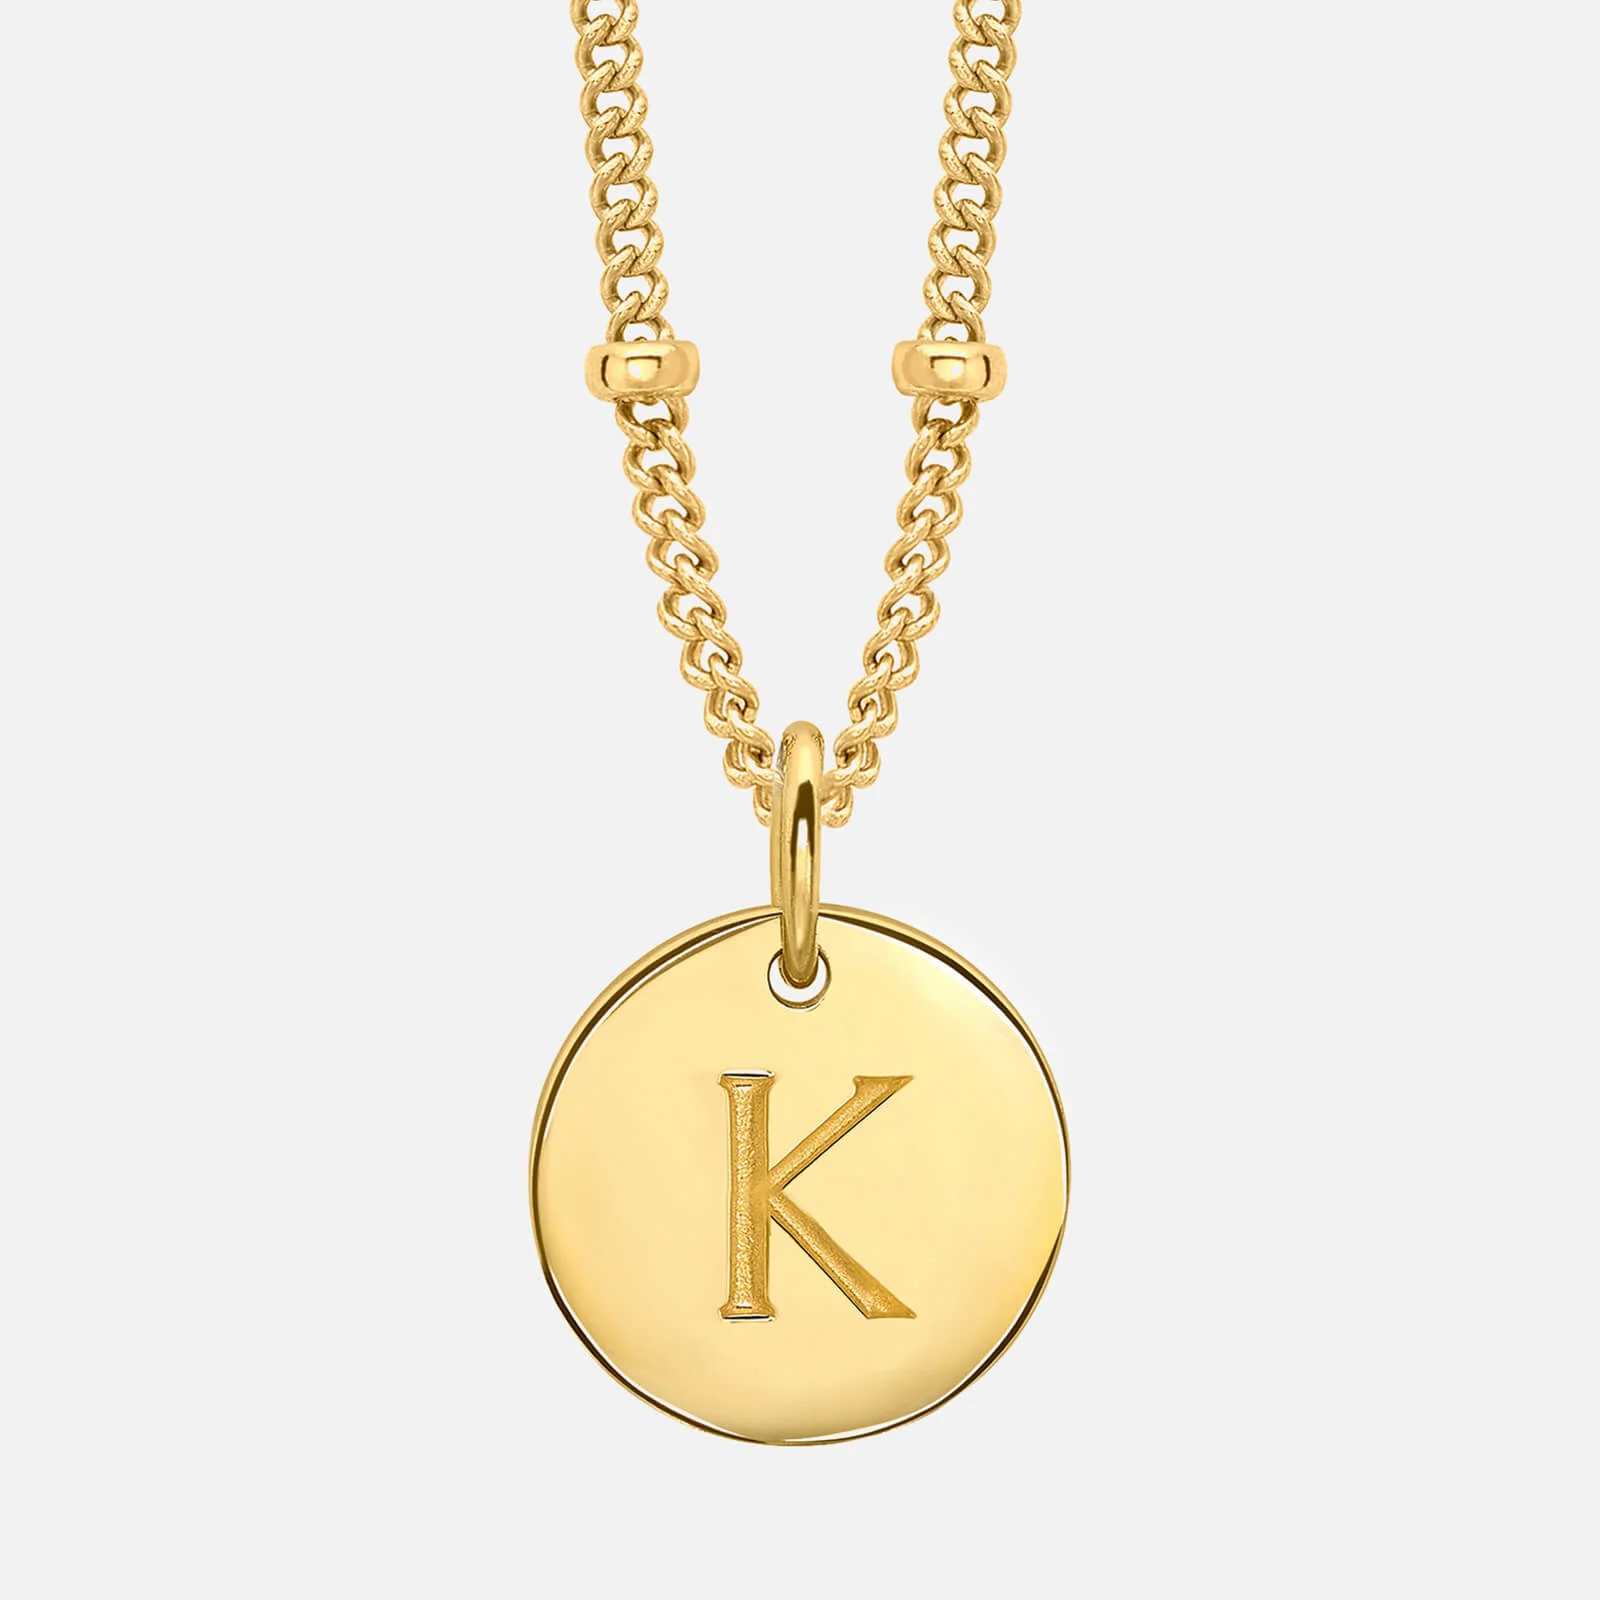 Missoma Women's Gold 'K' Initial Necklace - Gold Image 1